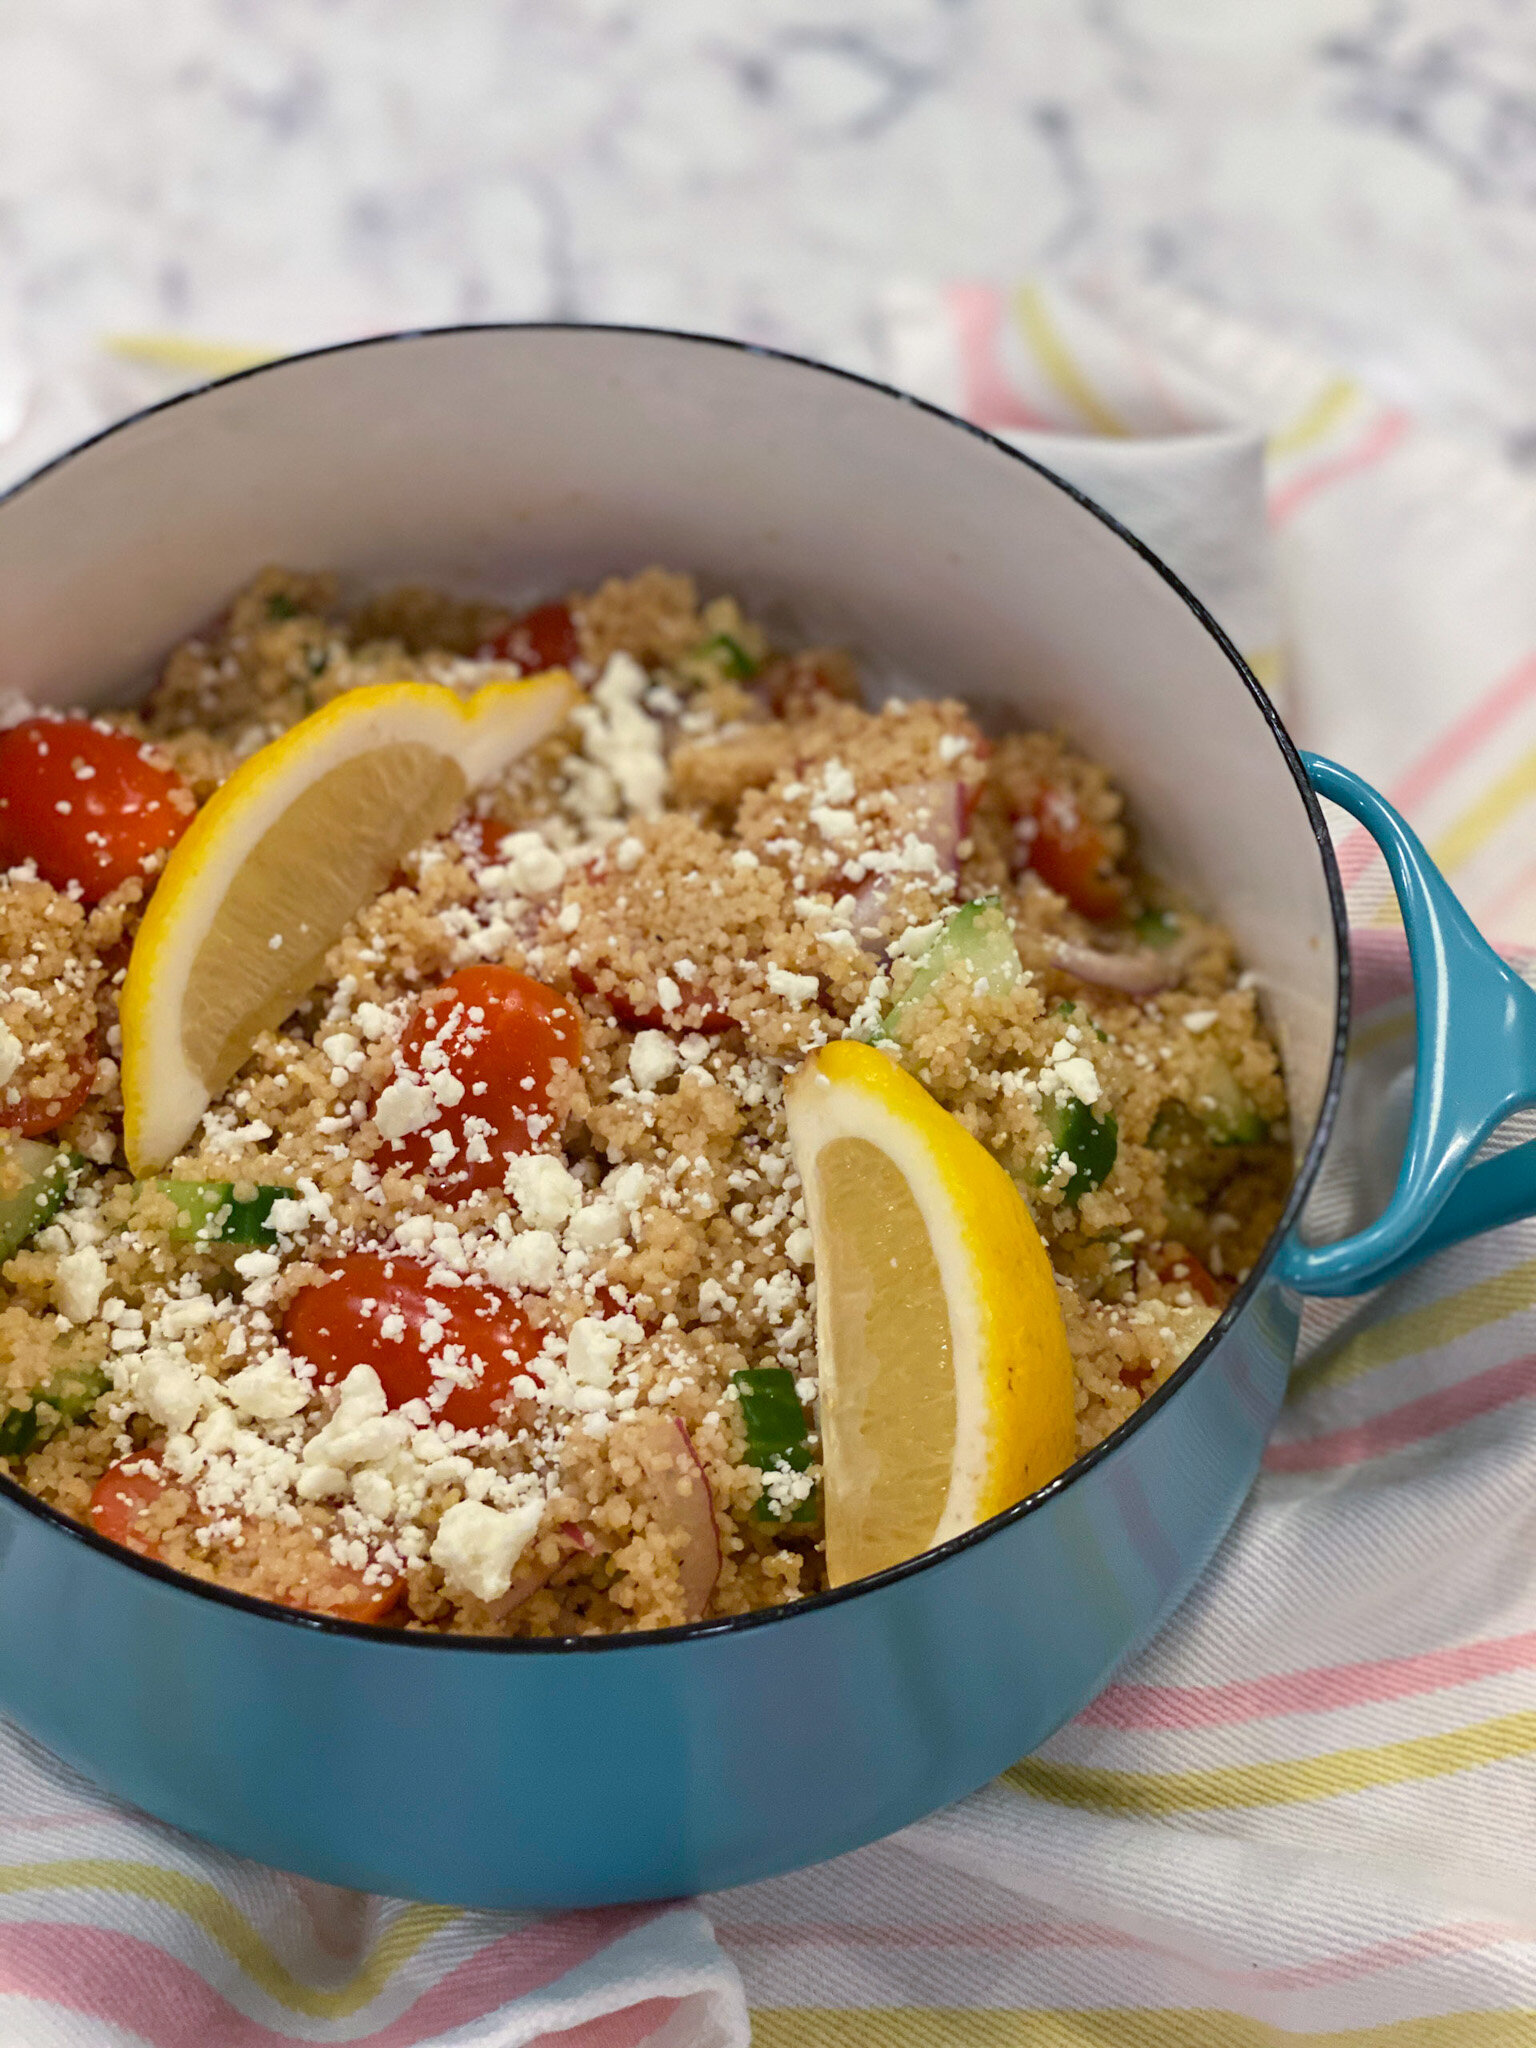 Couscous+Salad+with+cucumber%2C+tomatoes+and+red+onion